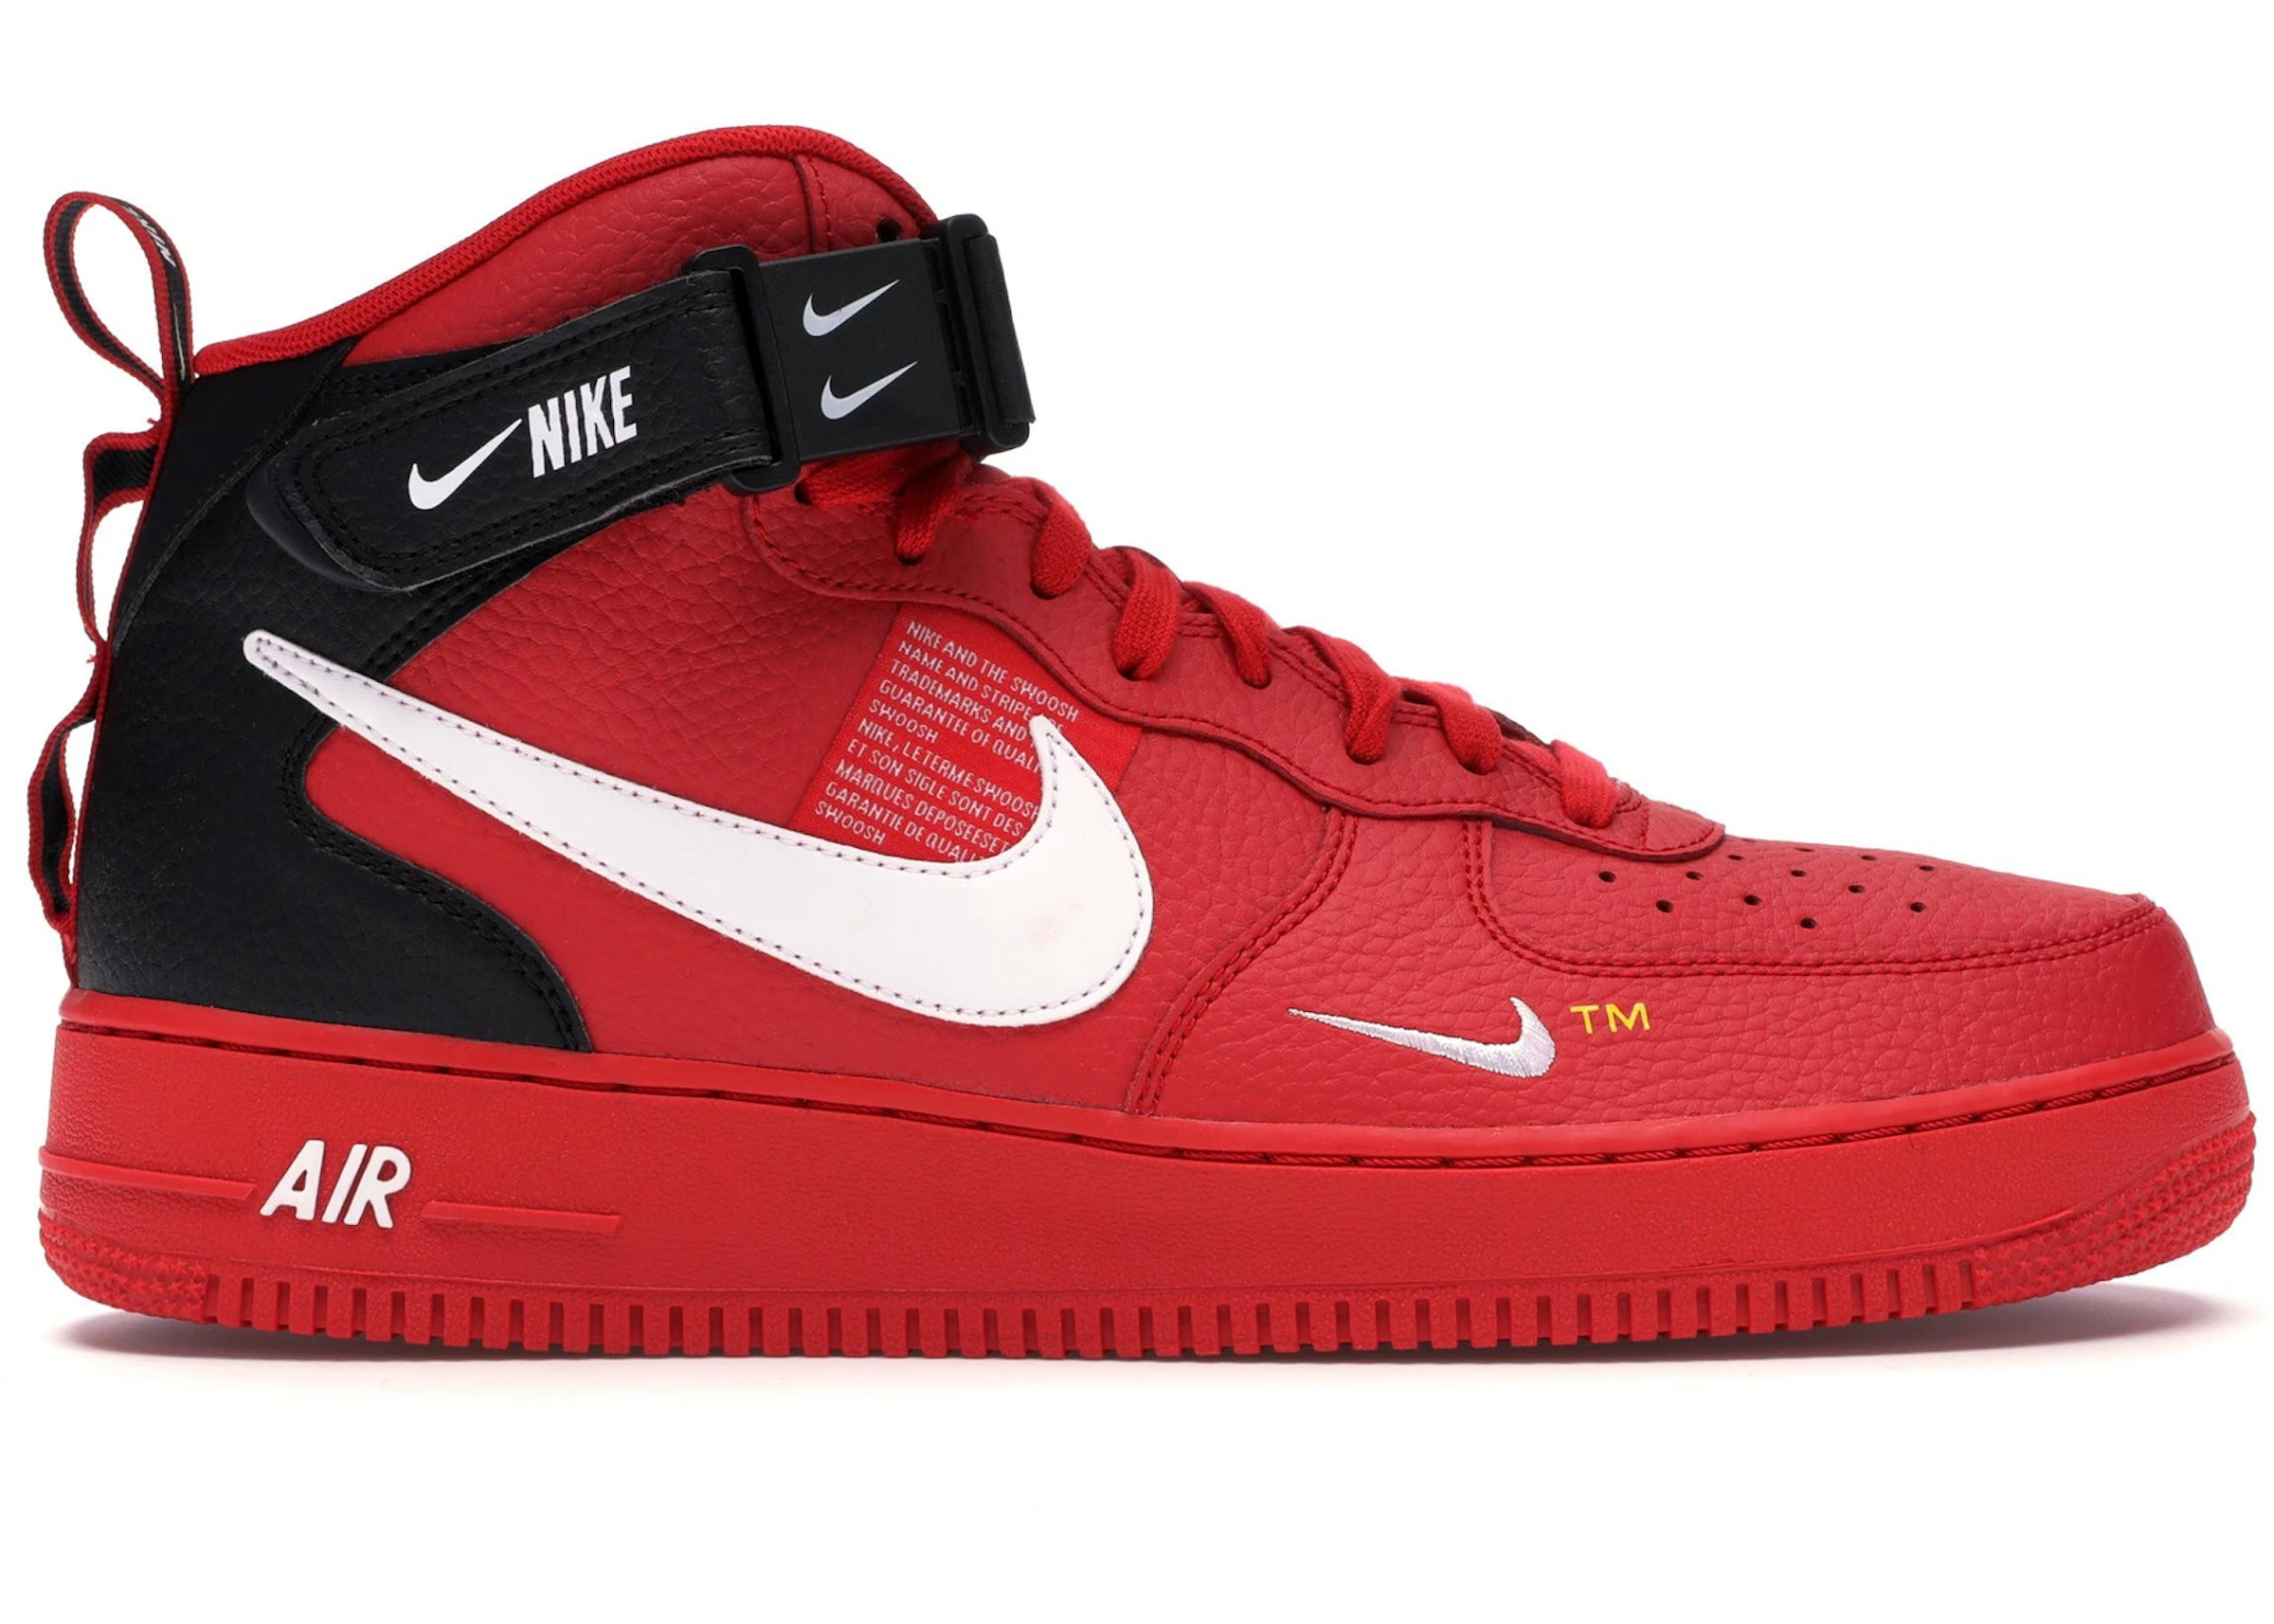 Incense blend Peruse Nike Air Force 1 Mid Utility University Red - 804609-605 - US